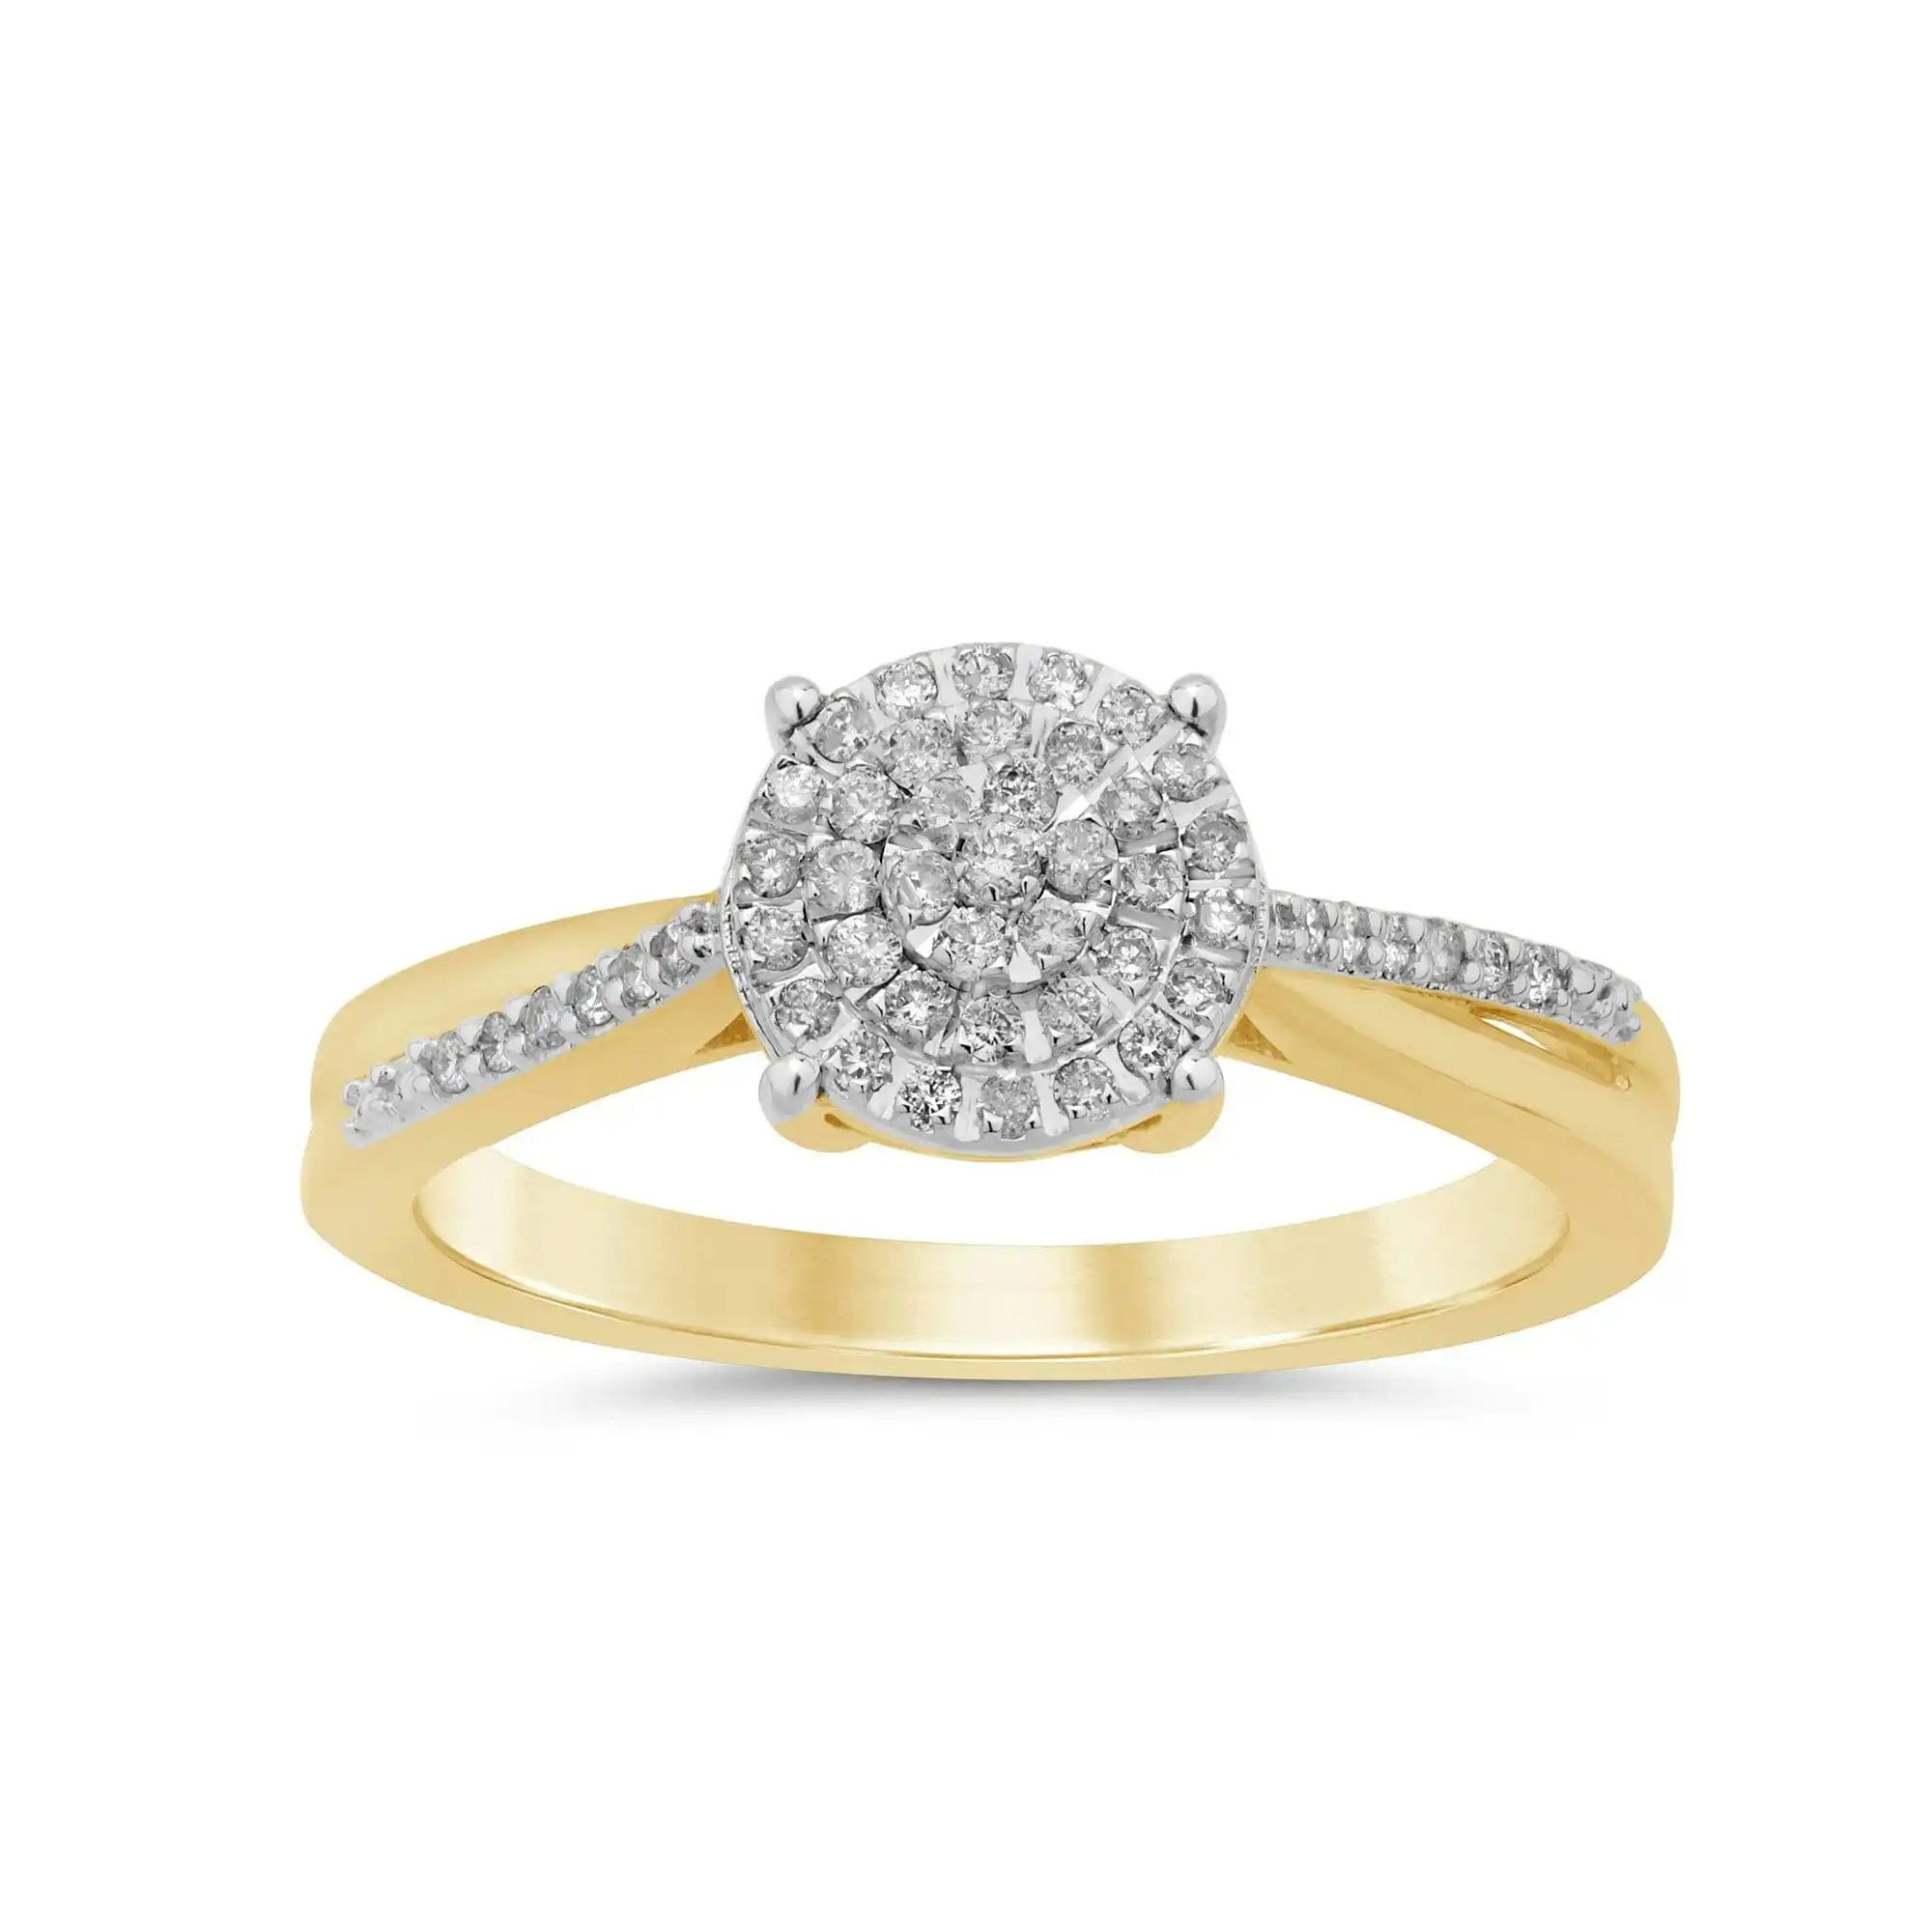 Solitaire Look Ring with 0.15ct of Diamond in 9ct Yellow Gold